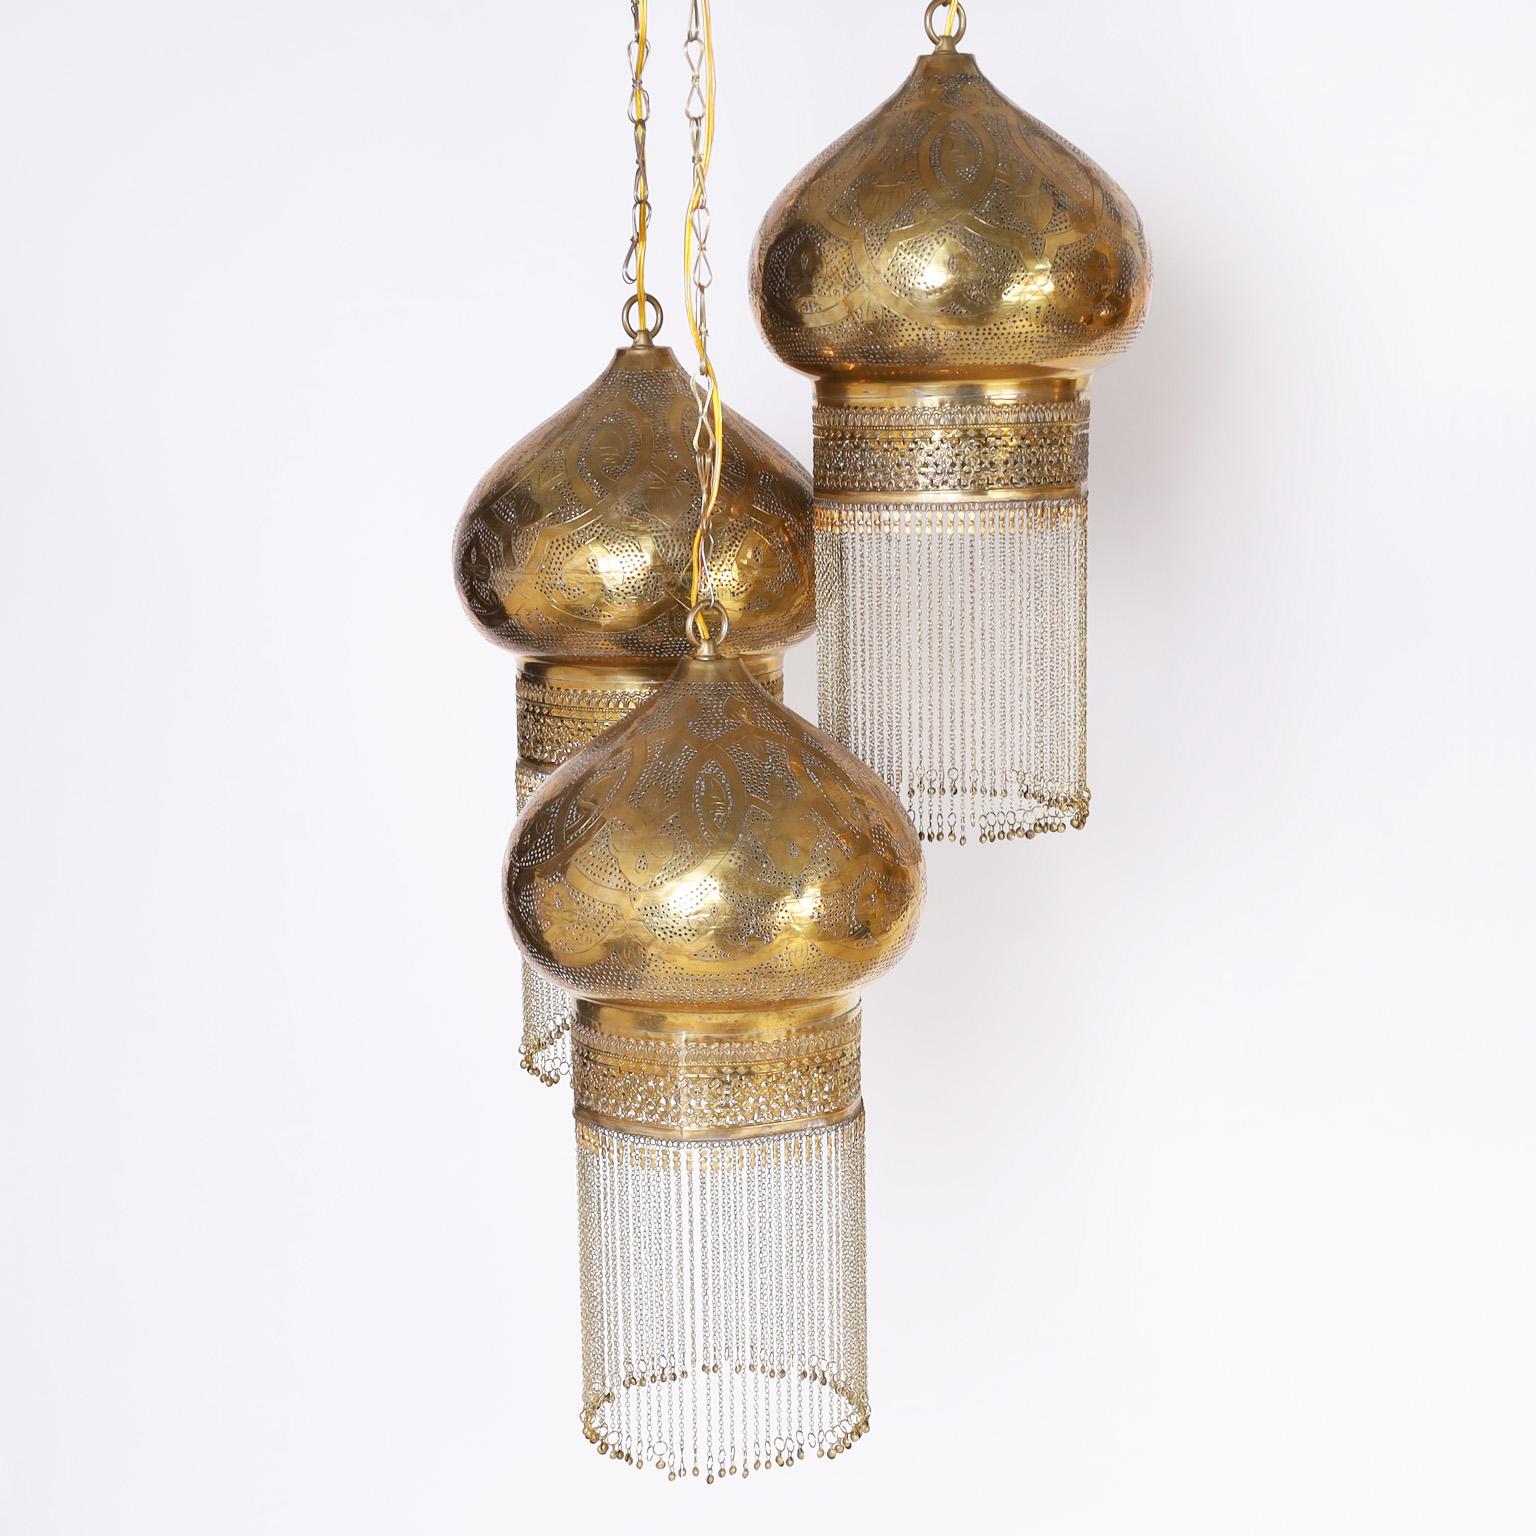 Pair of exotic Moroccan light fixtures each with three onion dome form pendants crafted in brass, tooled, inscribed, perforated, and finished with brass tassels in the Orientalist manner. Hand polished and lacquered for easy care.